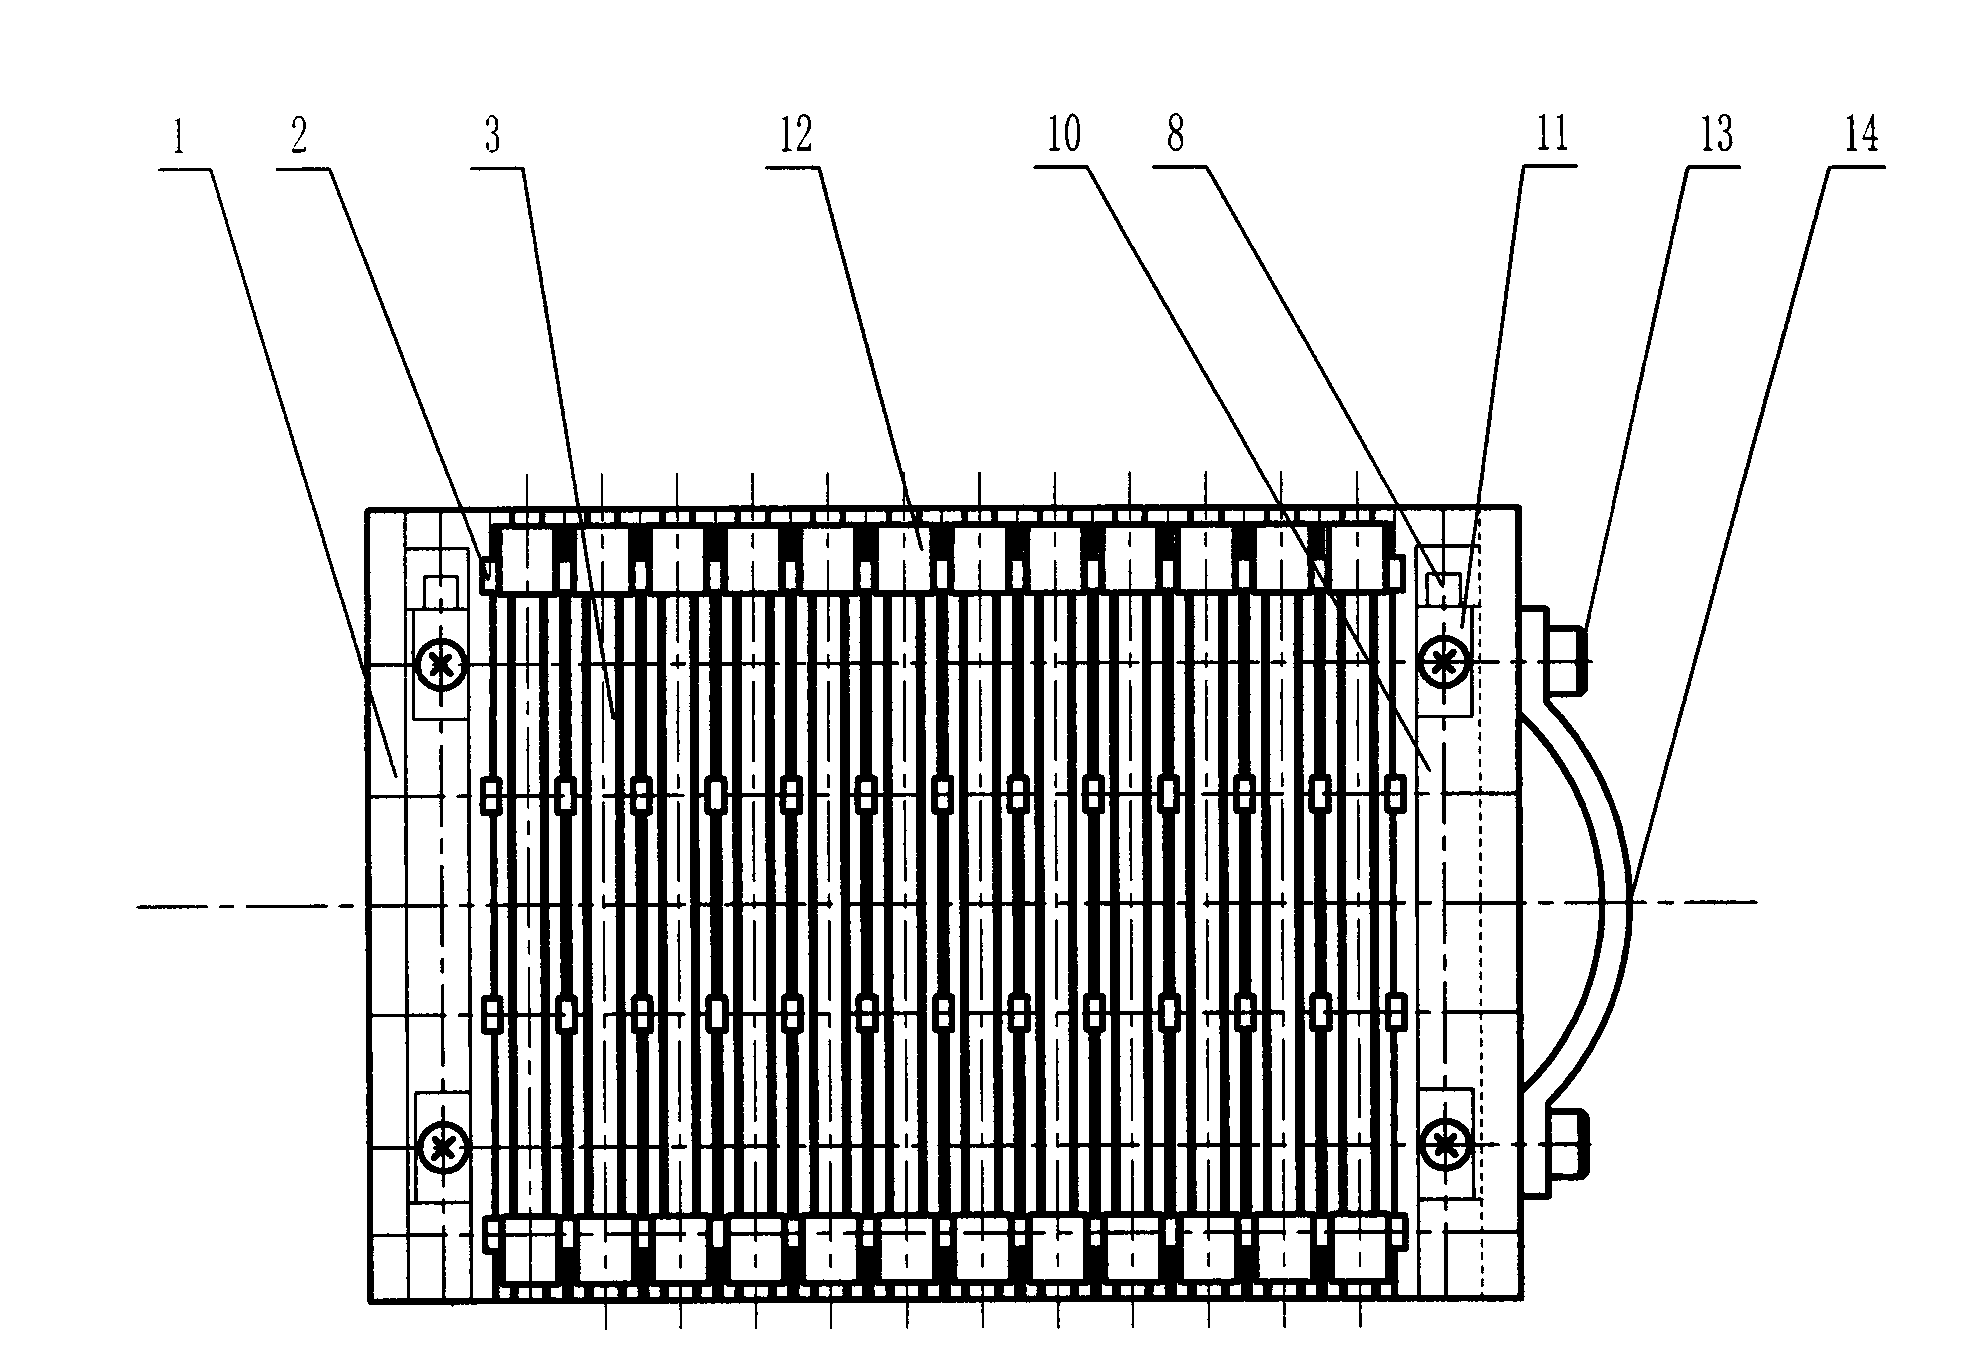 Composite pressing clamp of panel-type electrode bracket for COMMB-LED (chip on mirror metal board-light emitting diode)